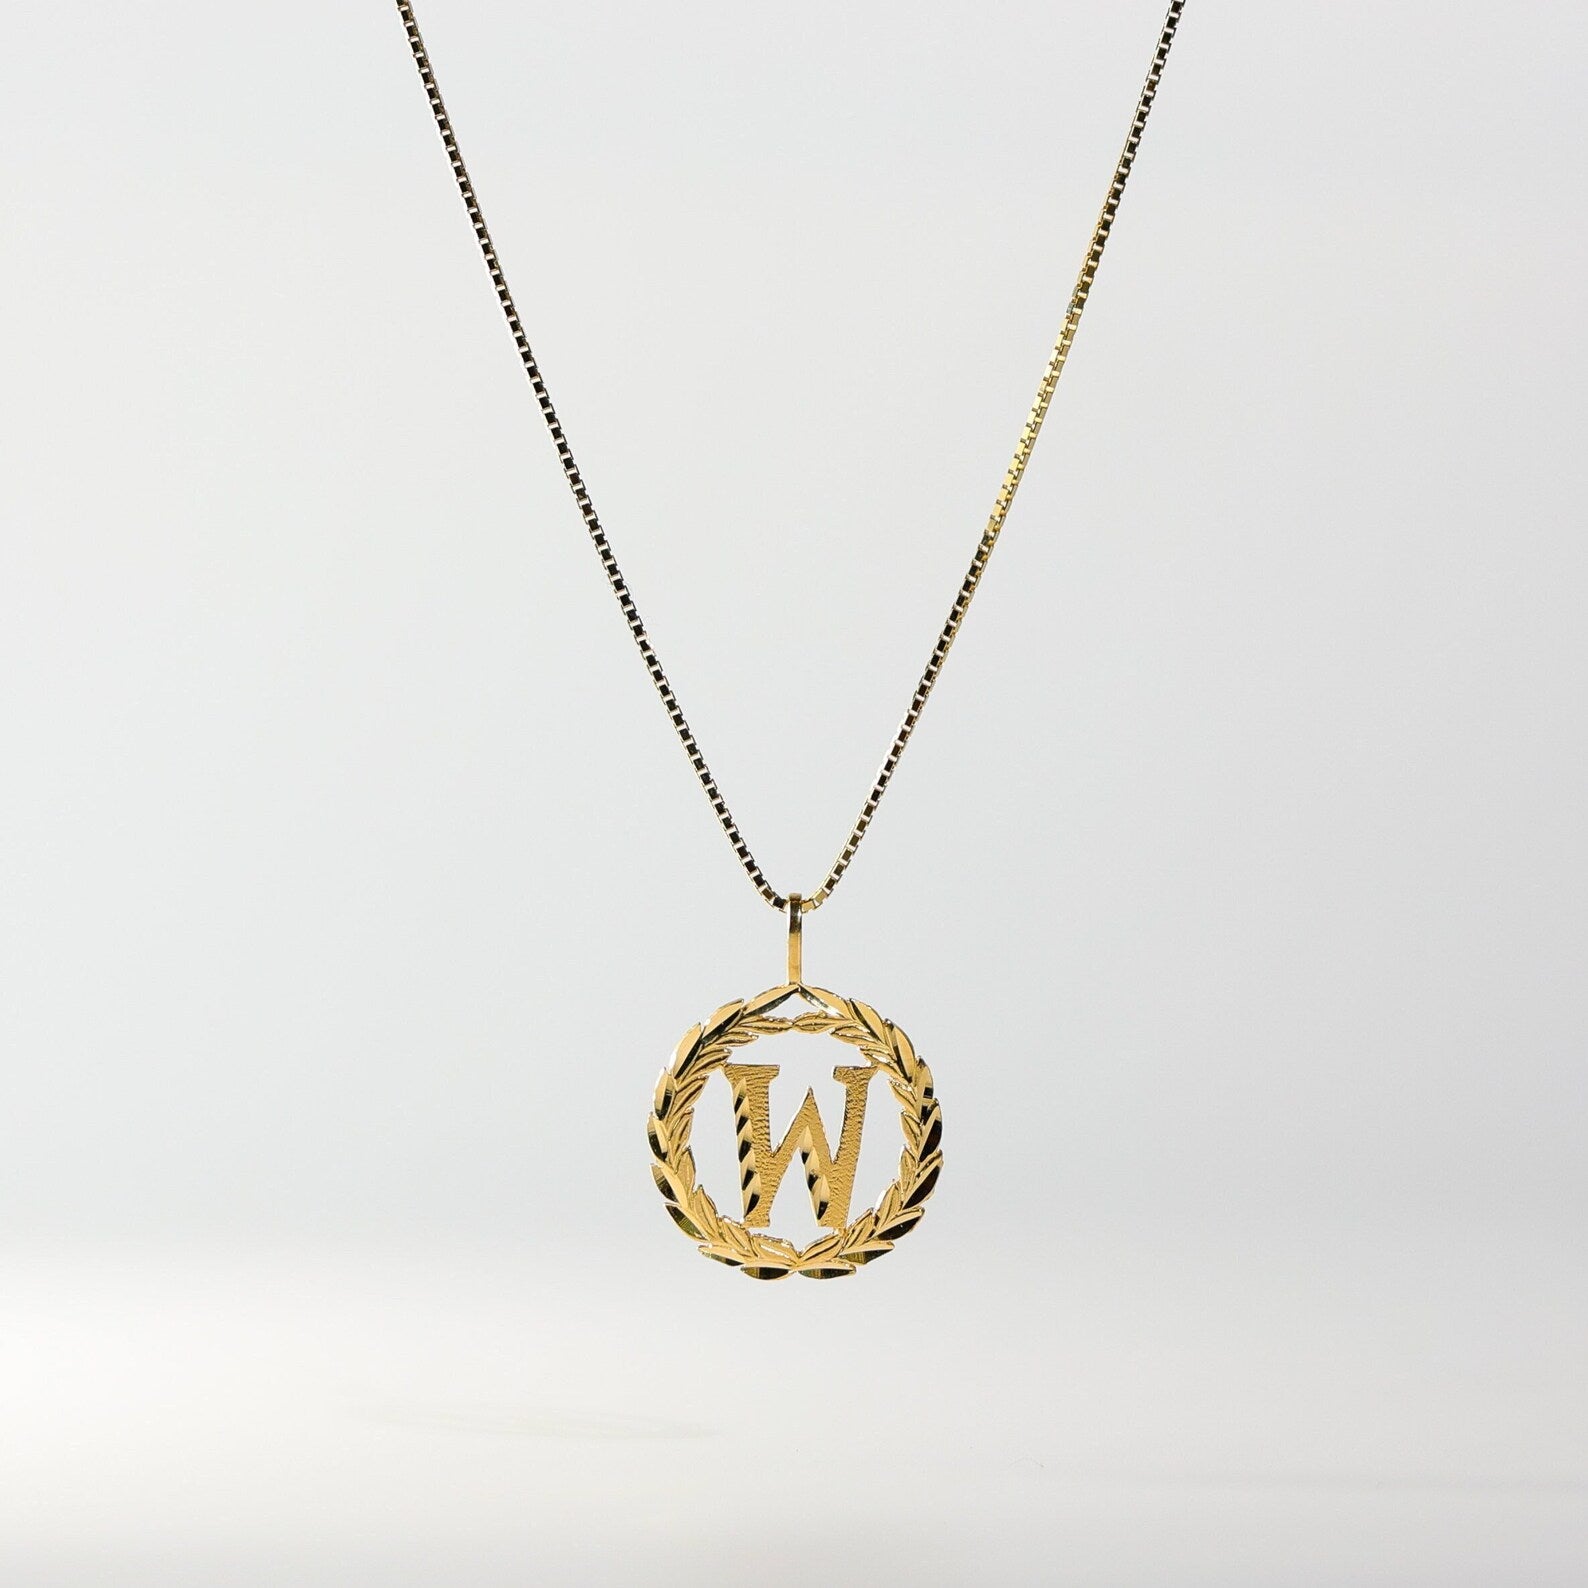 Gold Wreath W Initial Pendant | A-Z Pendants - Charlie & Co. Jewelry